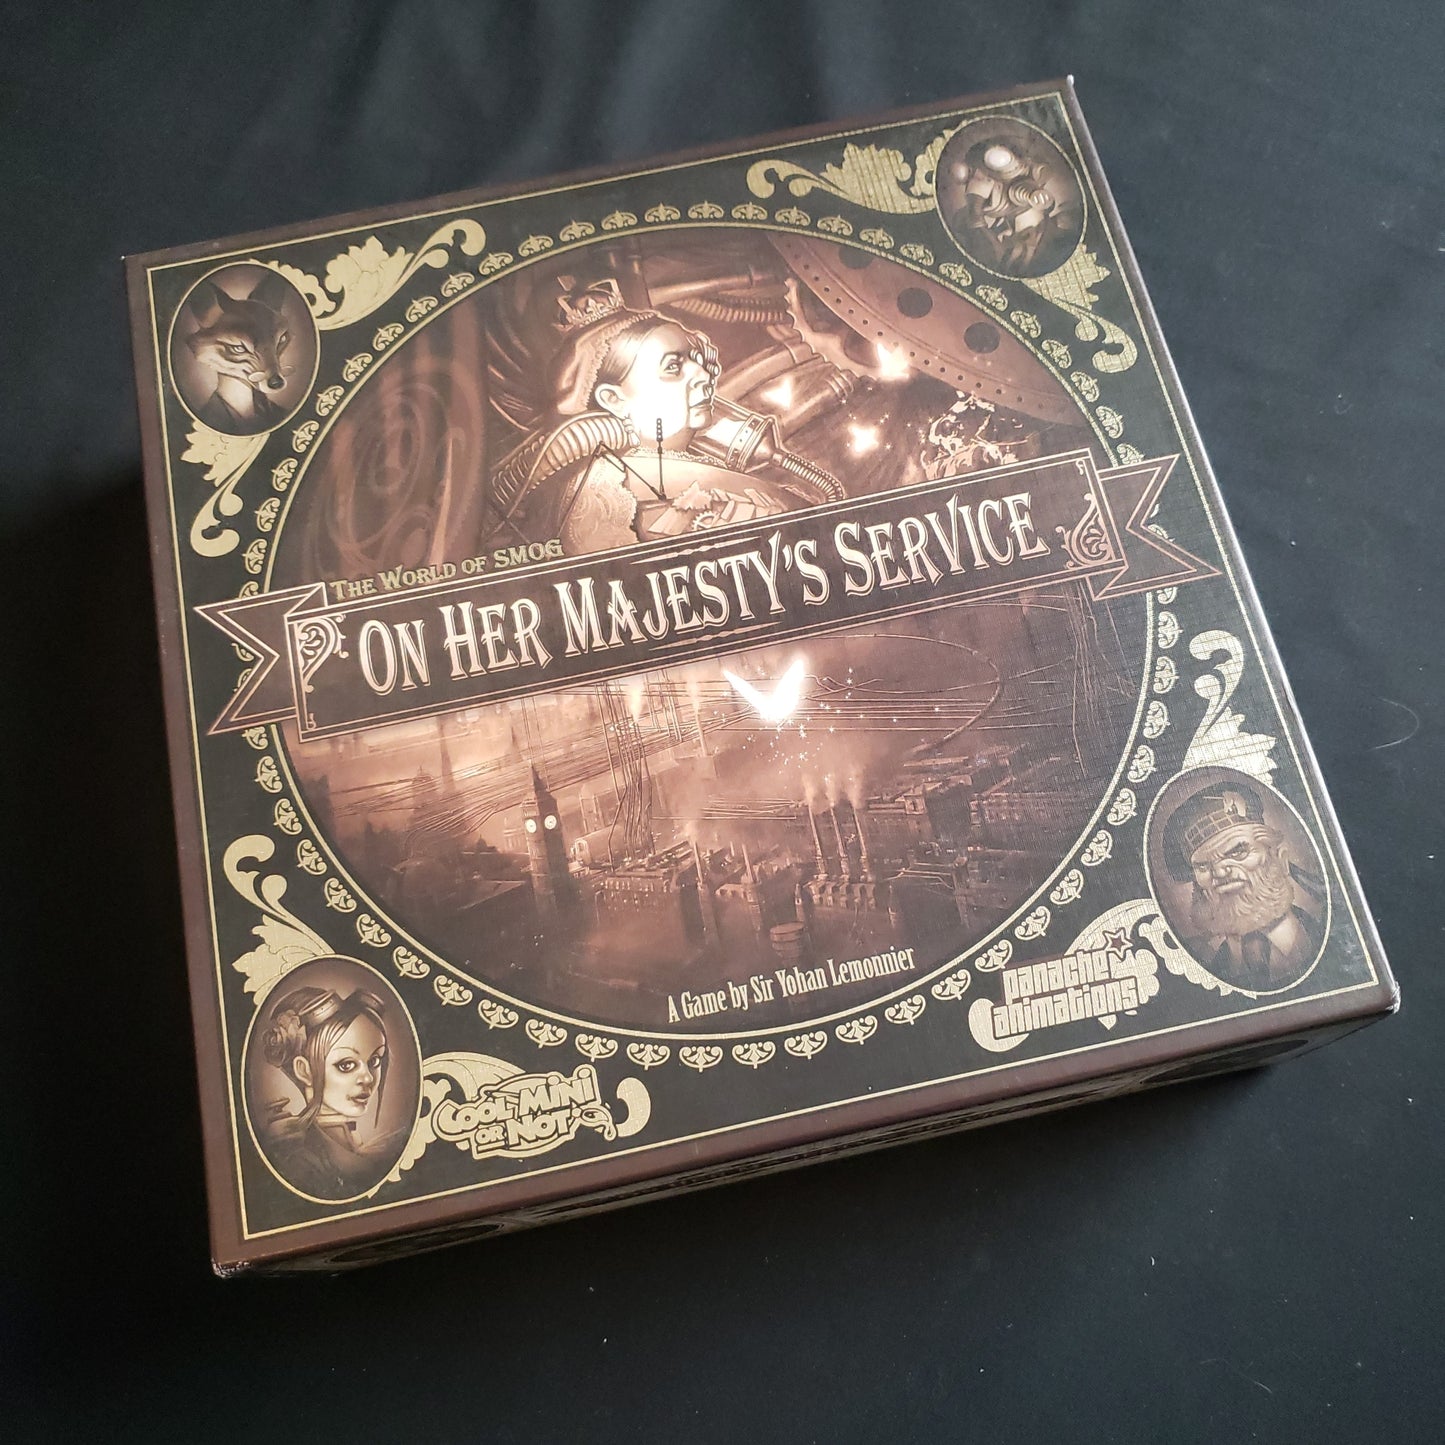 Image shows the front cover of the box of the On Her Majesty's Service board game